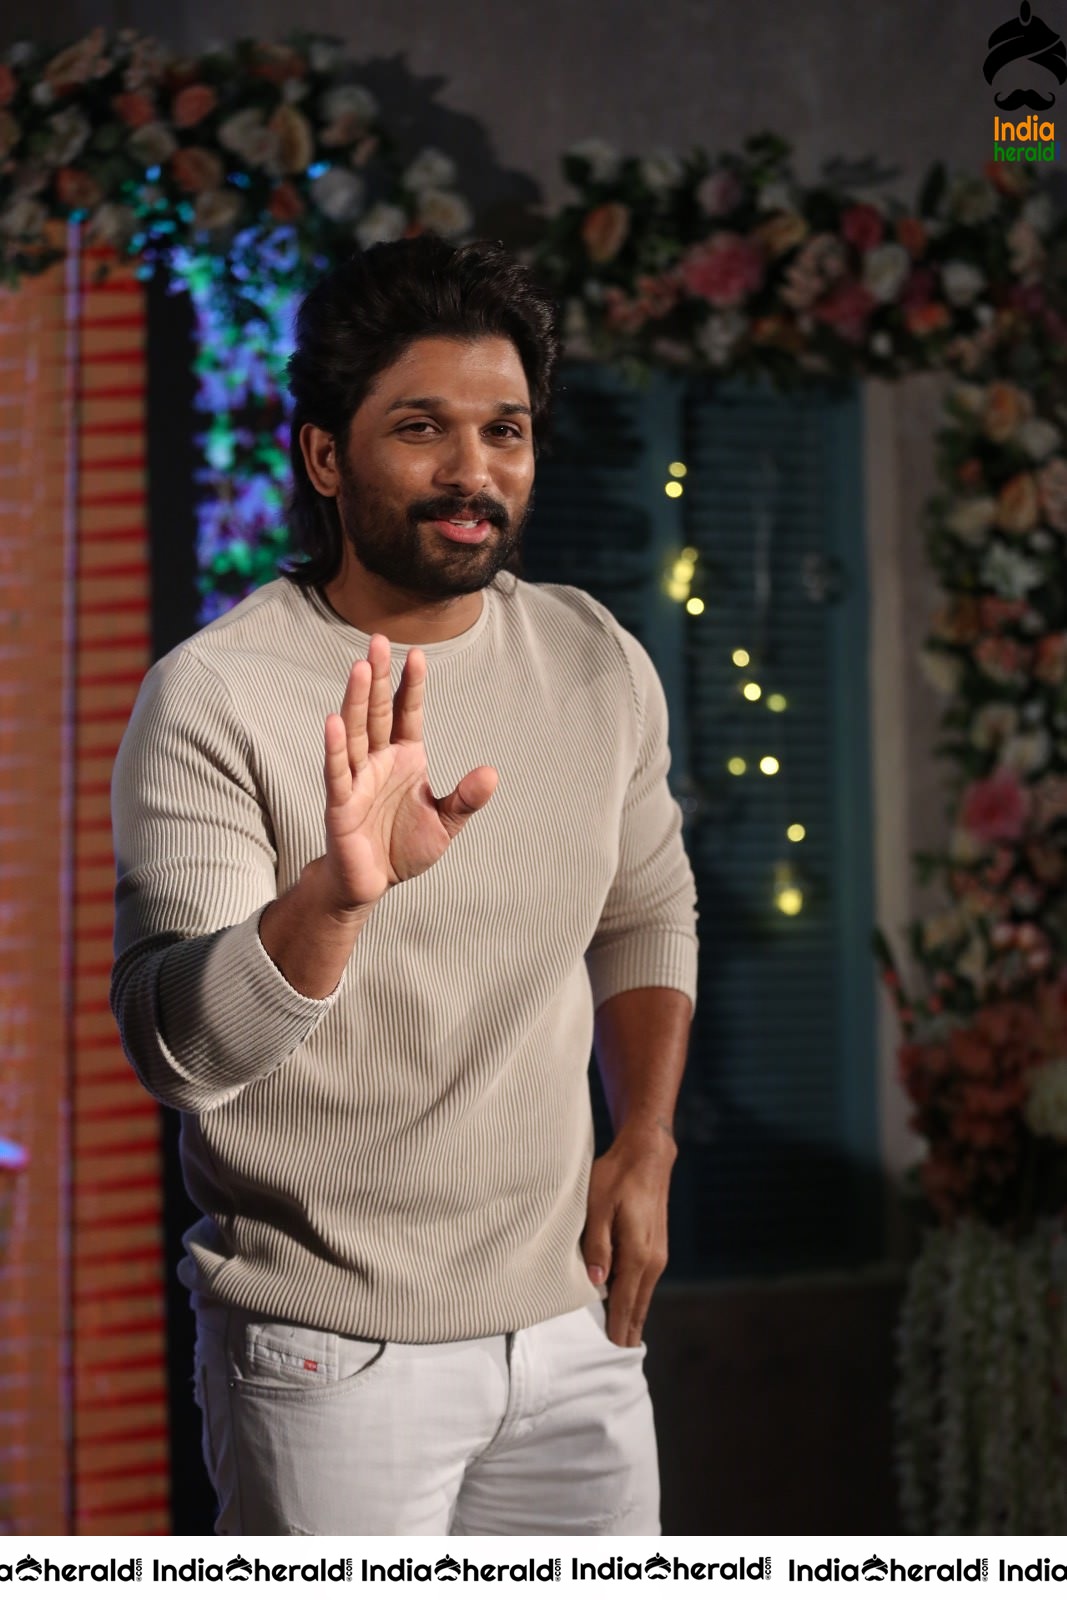 Actor Allu Arjun Looking Stylish and Suave in these latest clicks Set 1